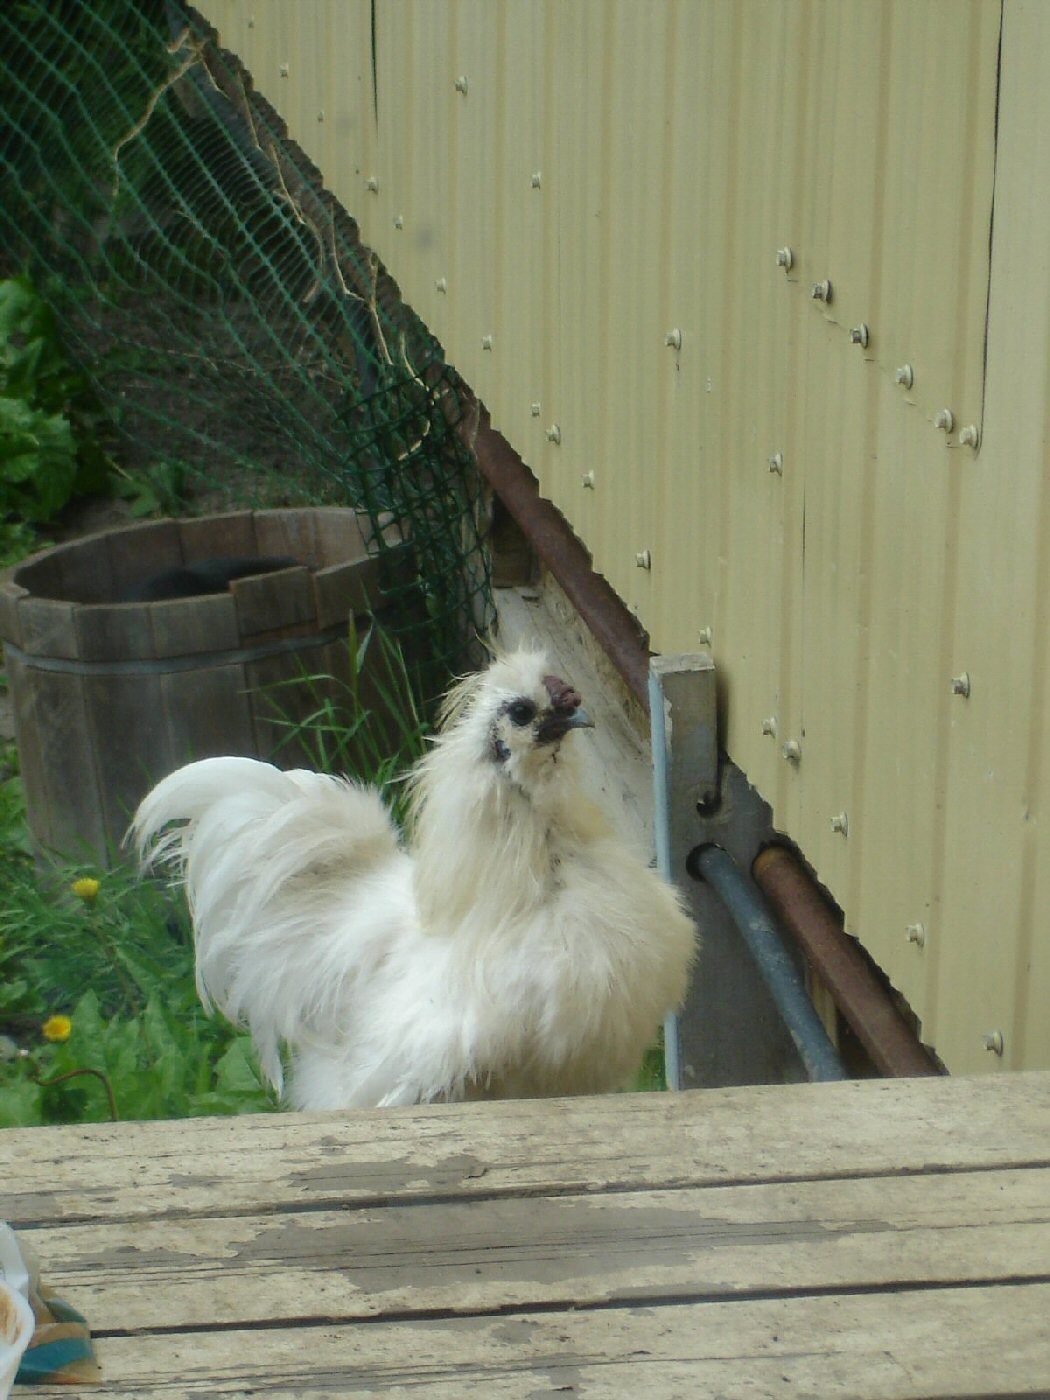 My first chicken!  Silkie-boy.  Hand raised since he was 4 weeks old, really hoped for a hen but she ended up being a He!!! lol  I really love this guy!!!